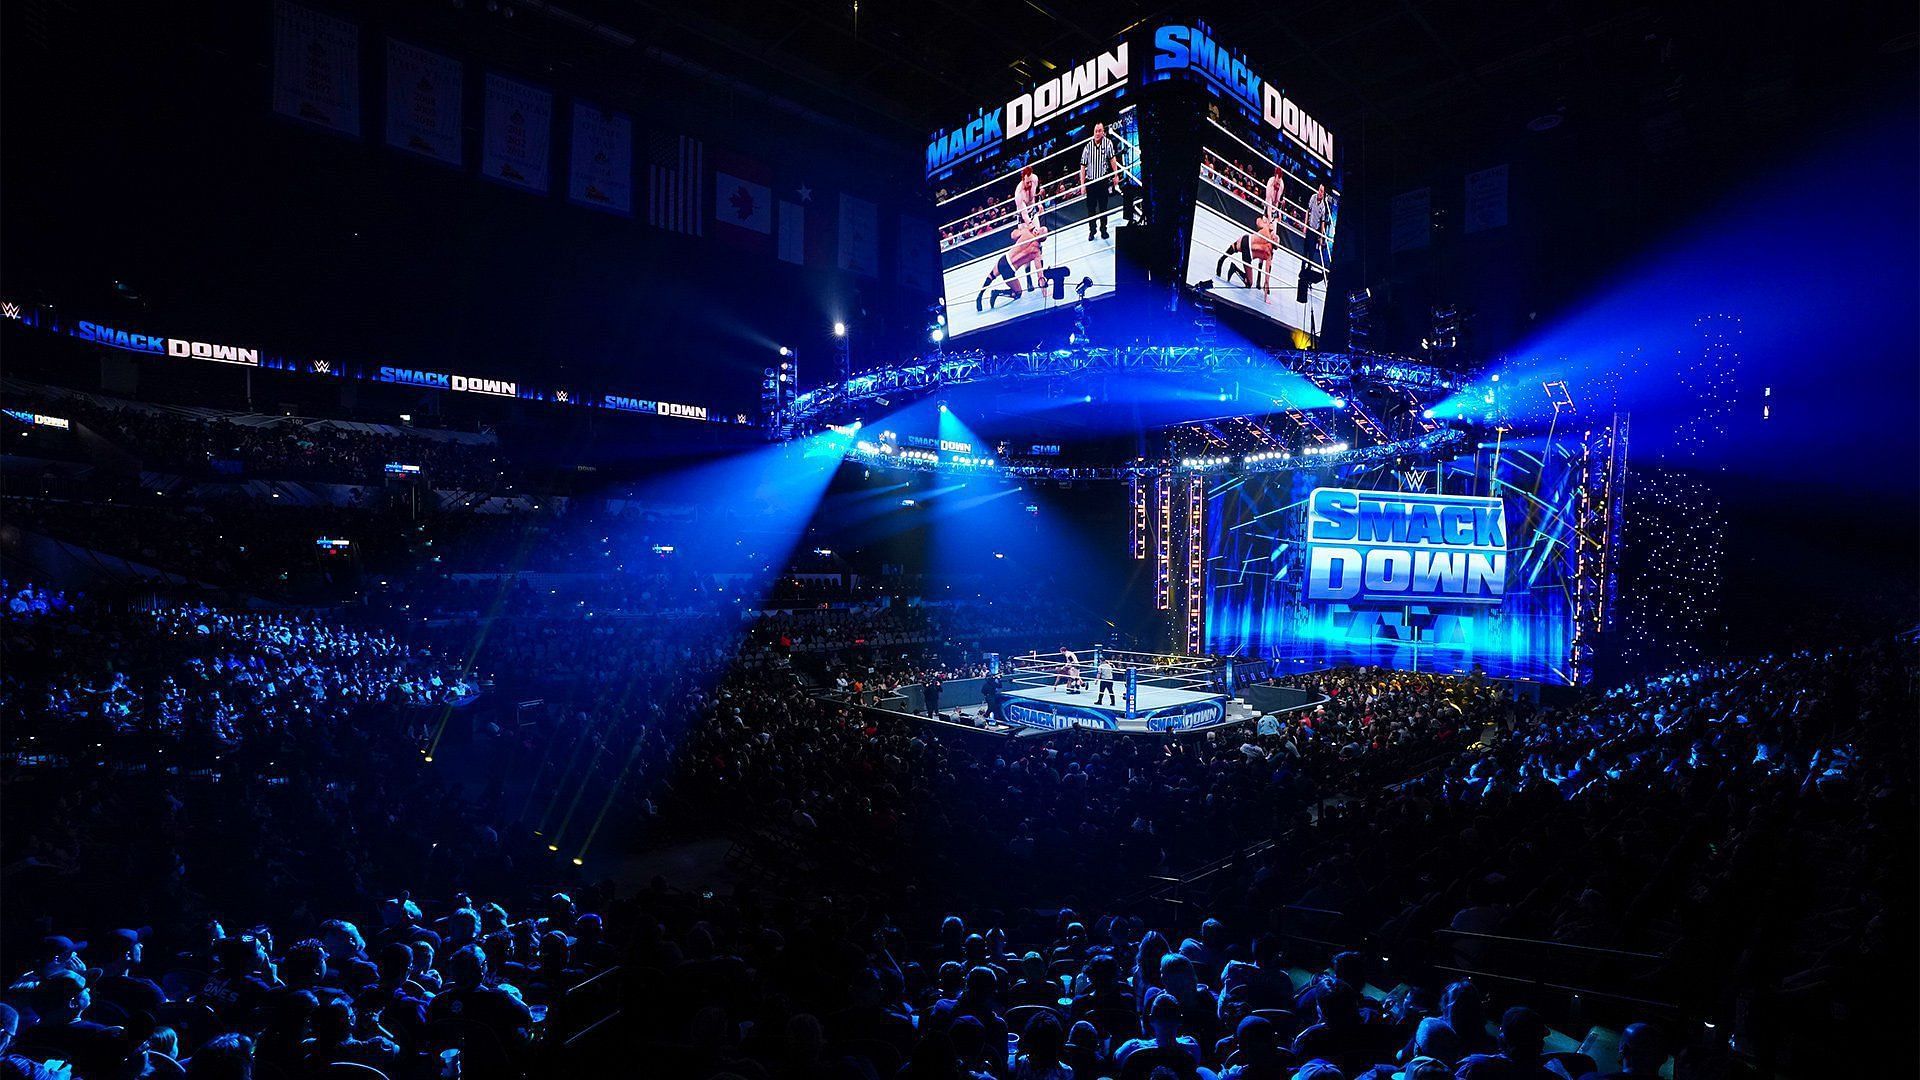 The WWE Universe packs a local arena for a live SmackDown taping